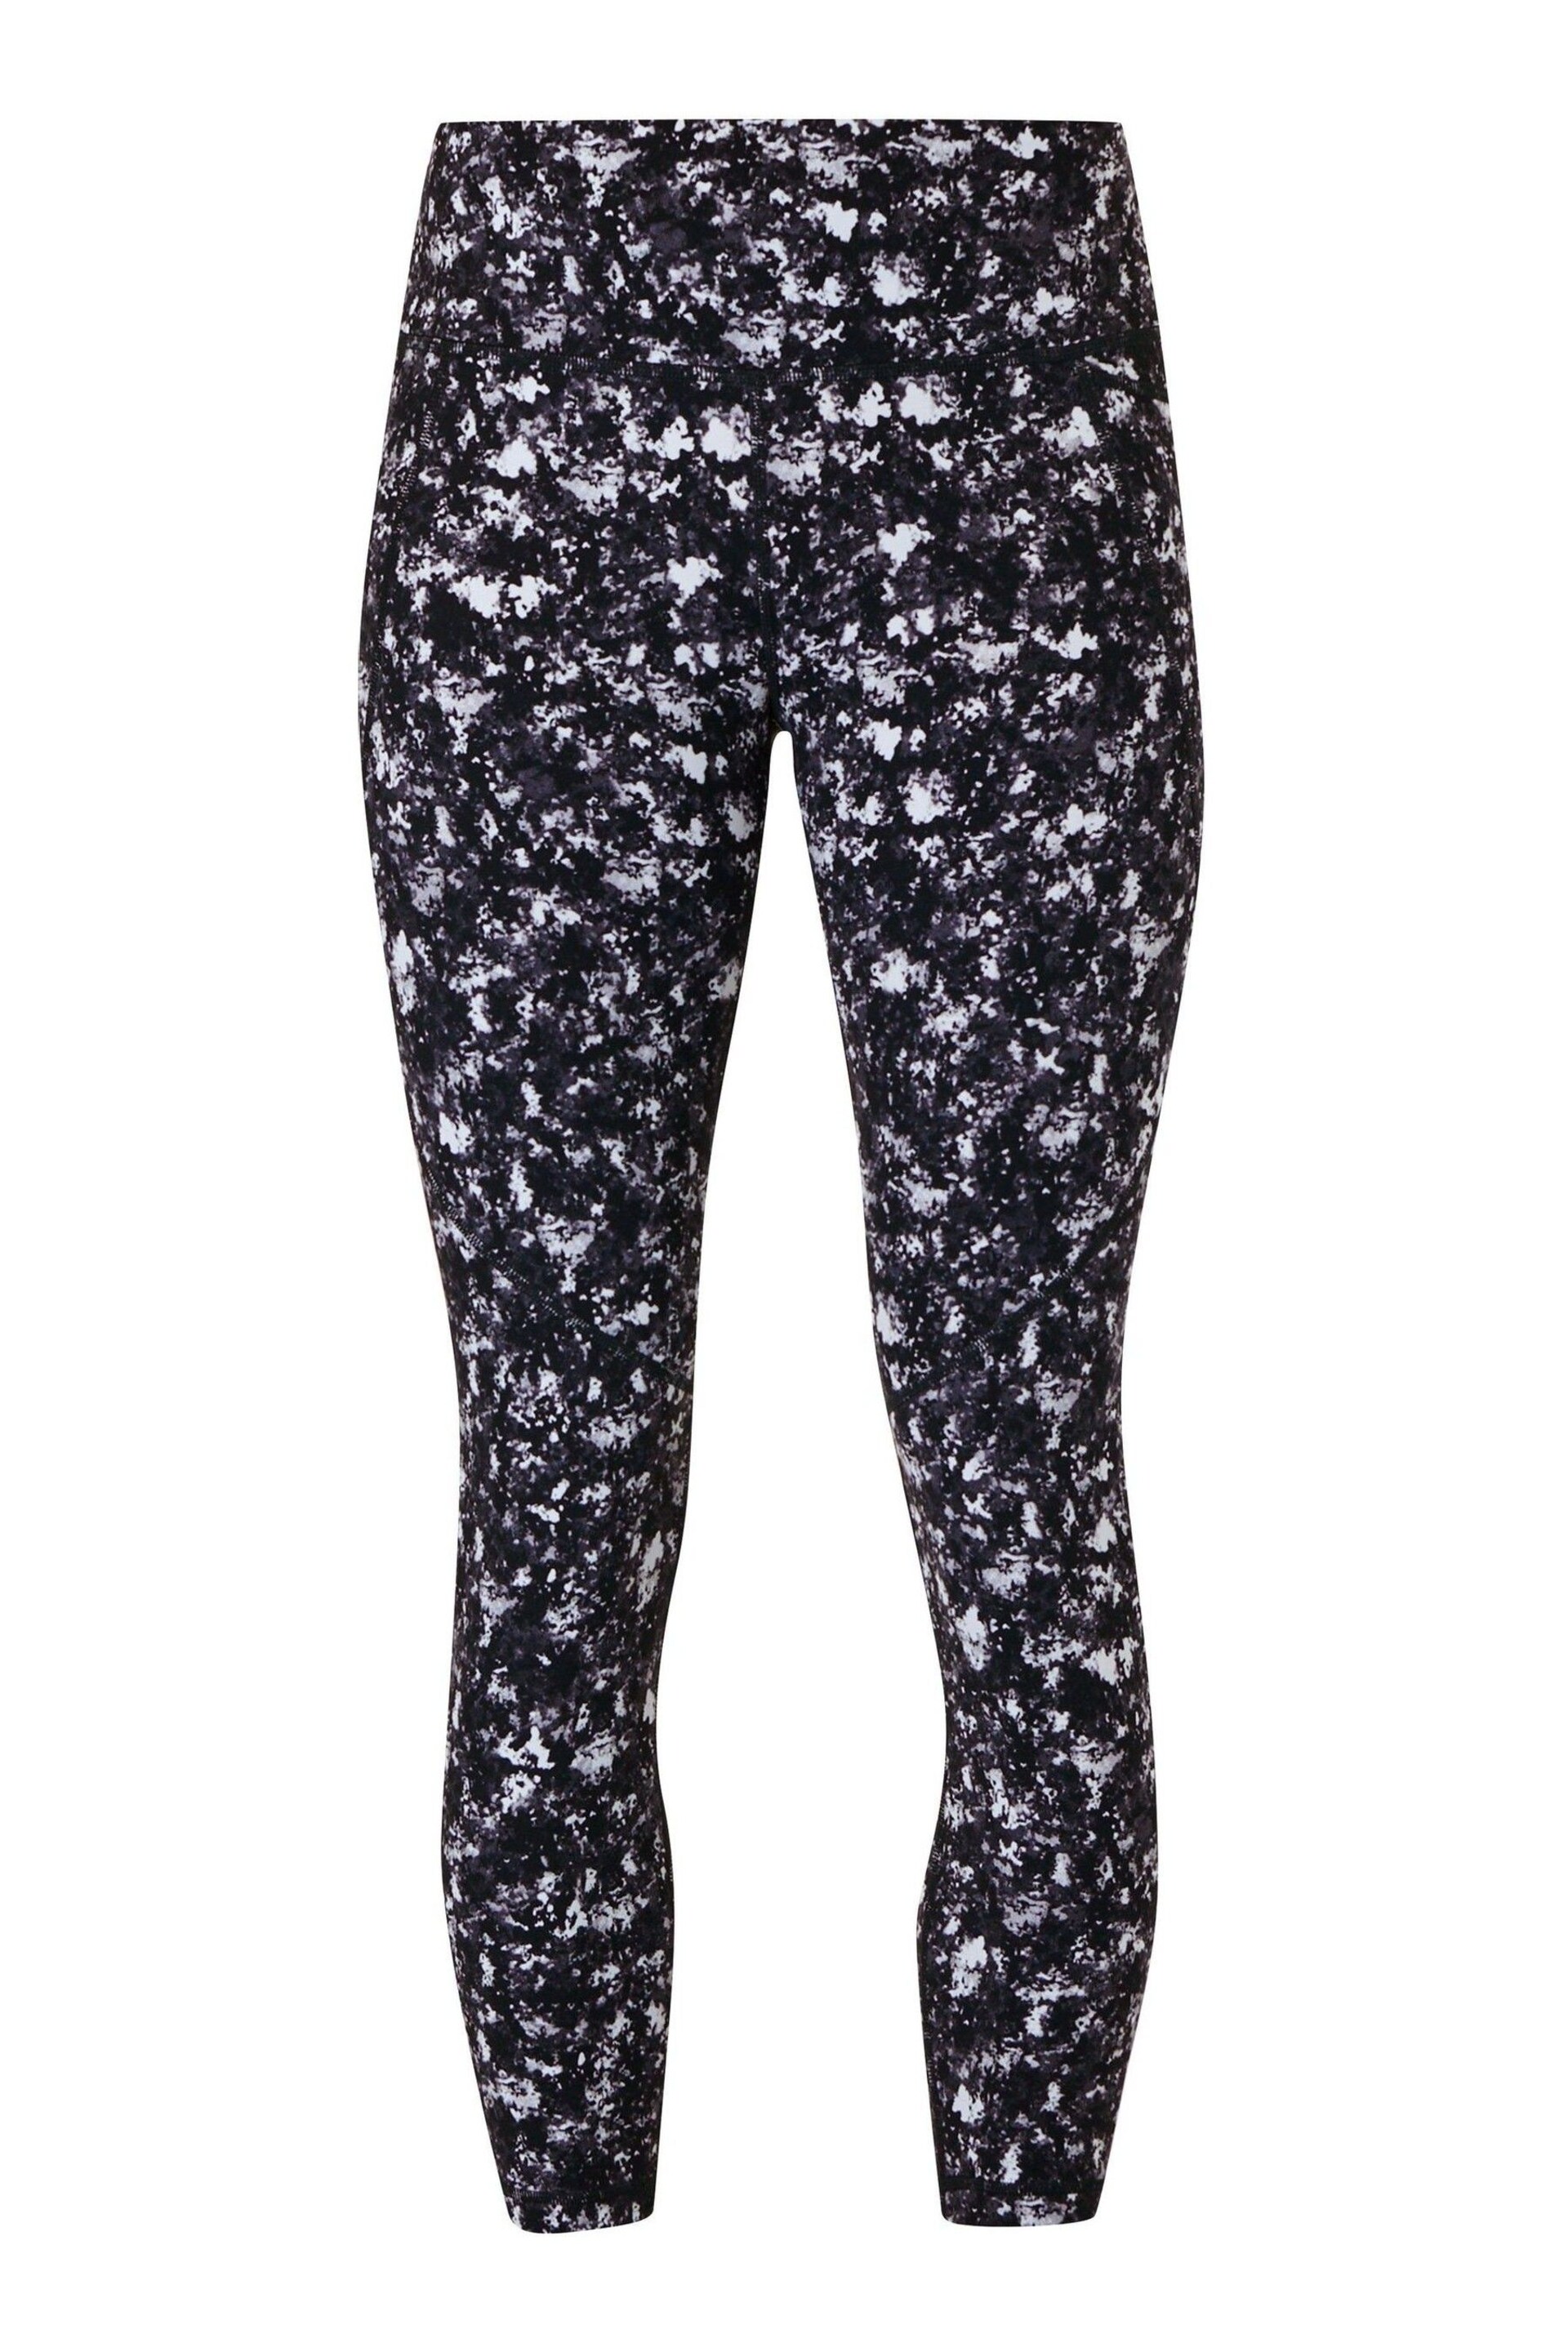 Sweaty Betty Black Electric Texture Print Full Length Power Workout Leggings - Image 10 of 10